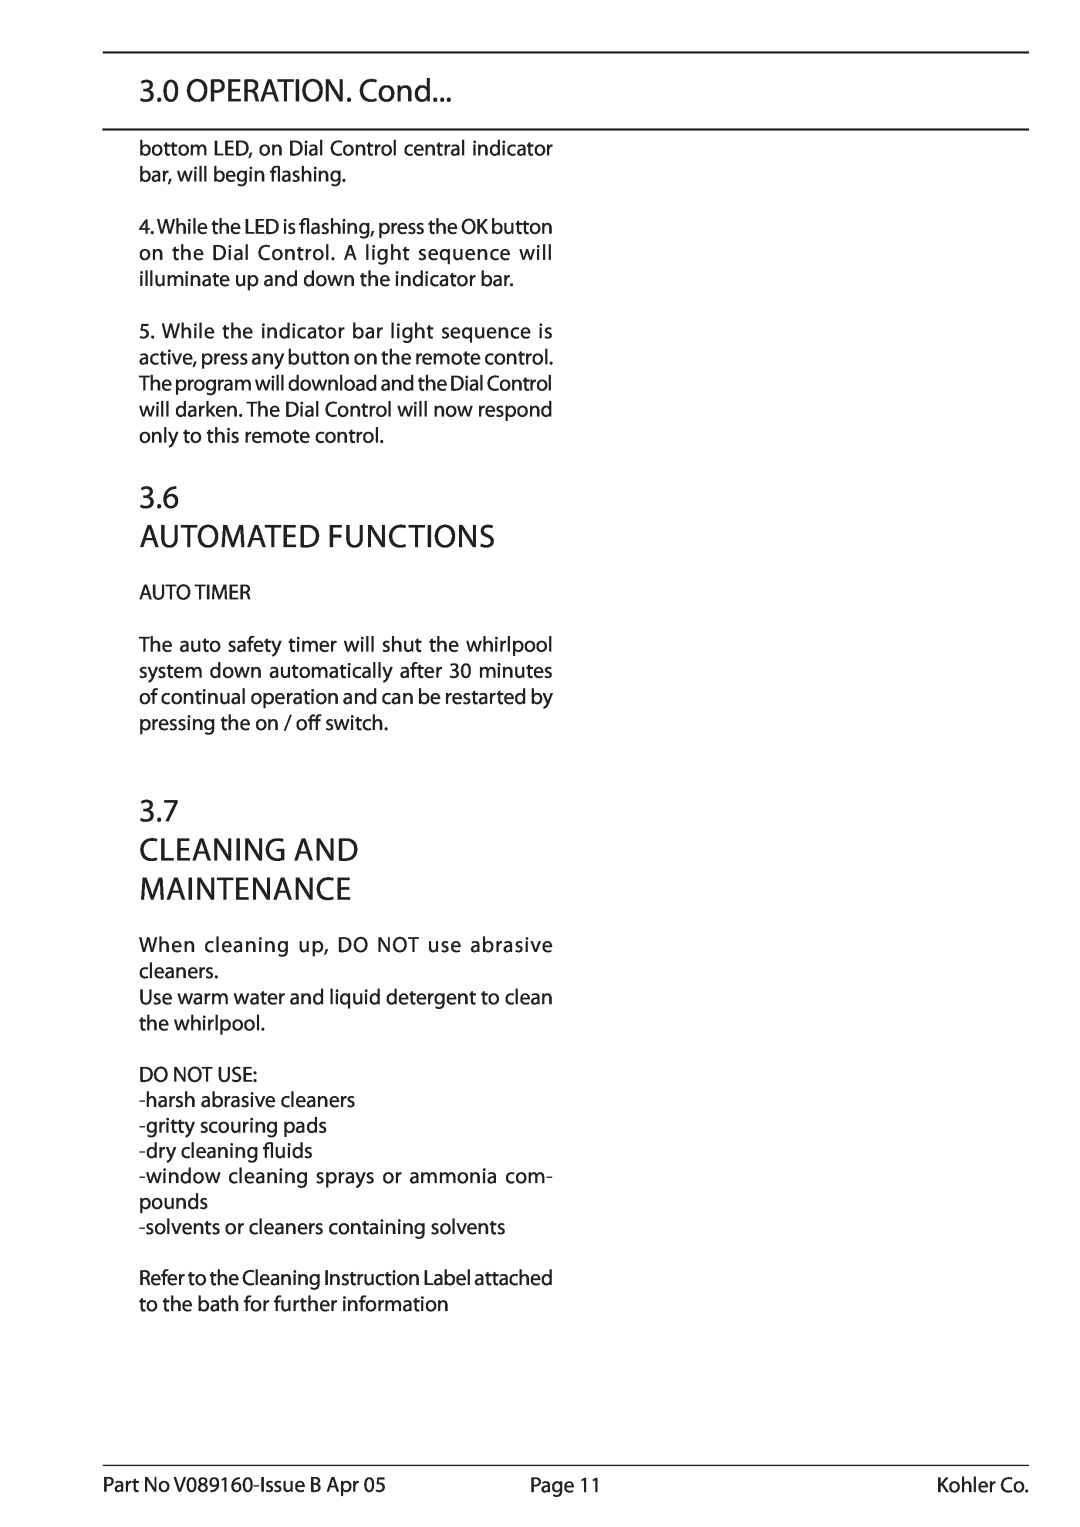 Kohler K-1110-CT-0, V089160 installation instructions Automated Functions, OPERATION. Cond, Cleaning And Maintenance 